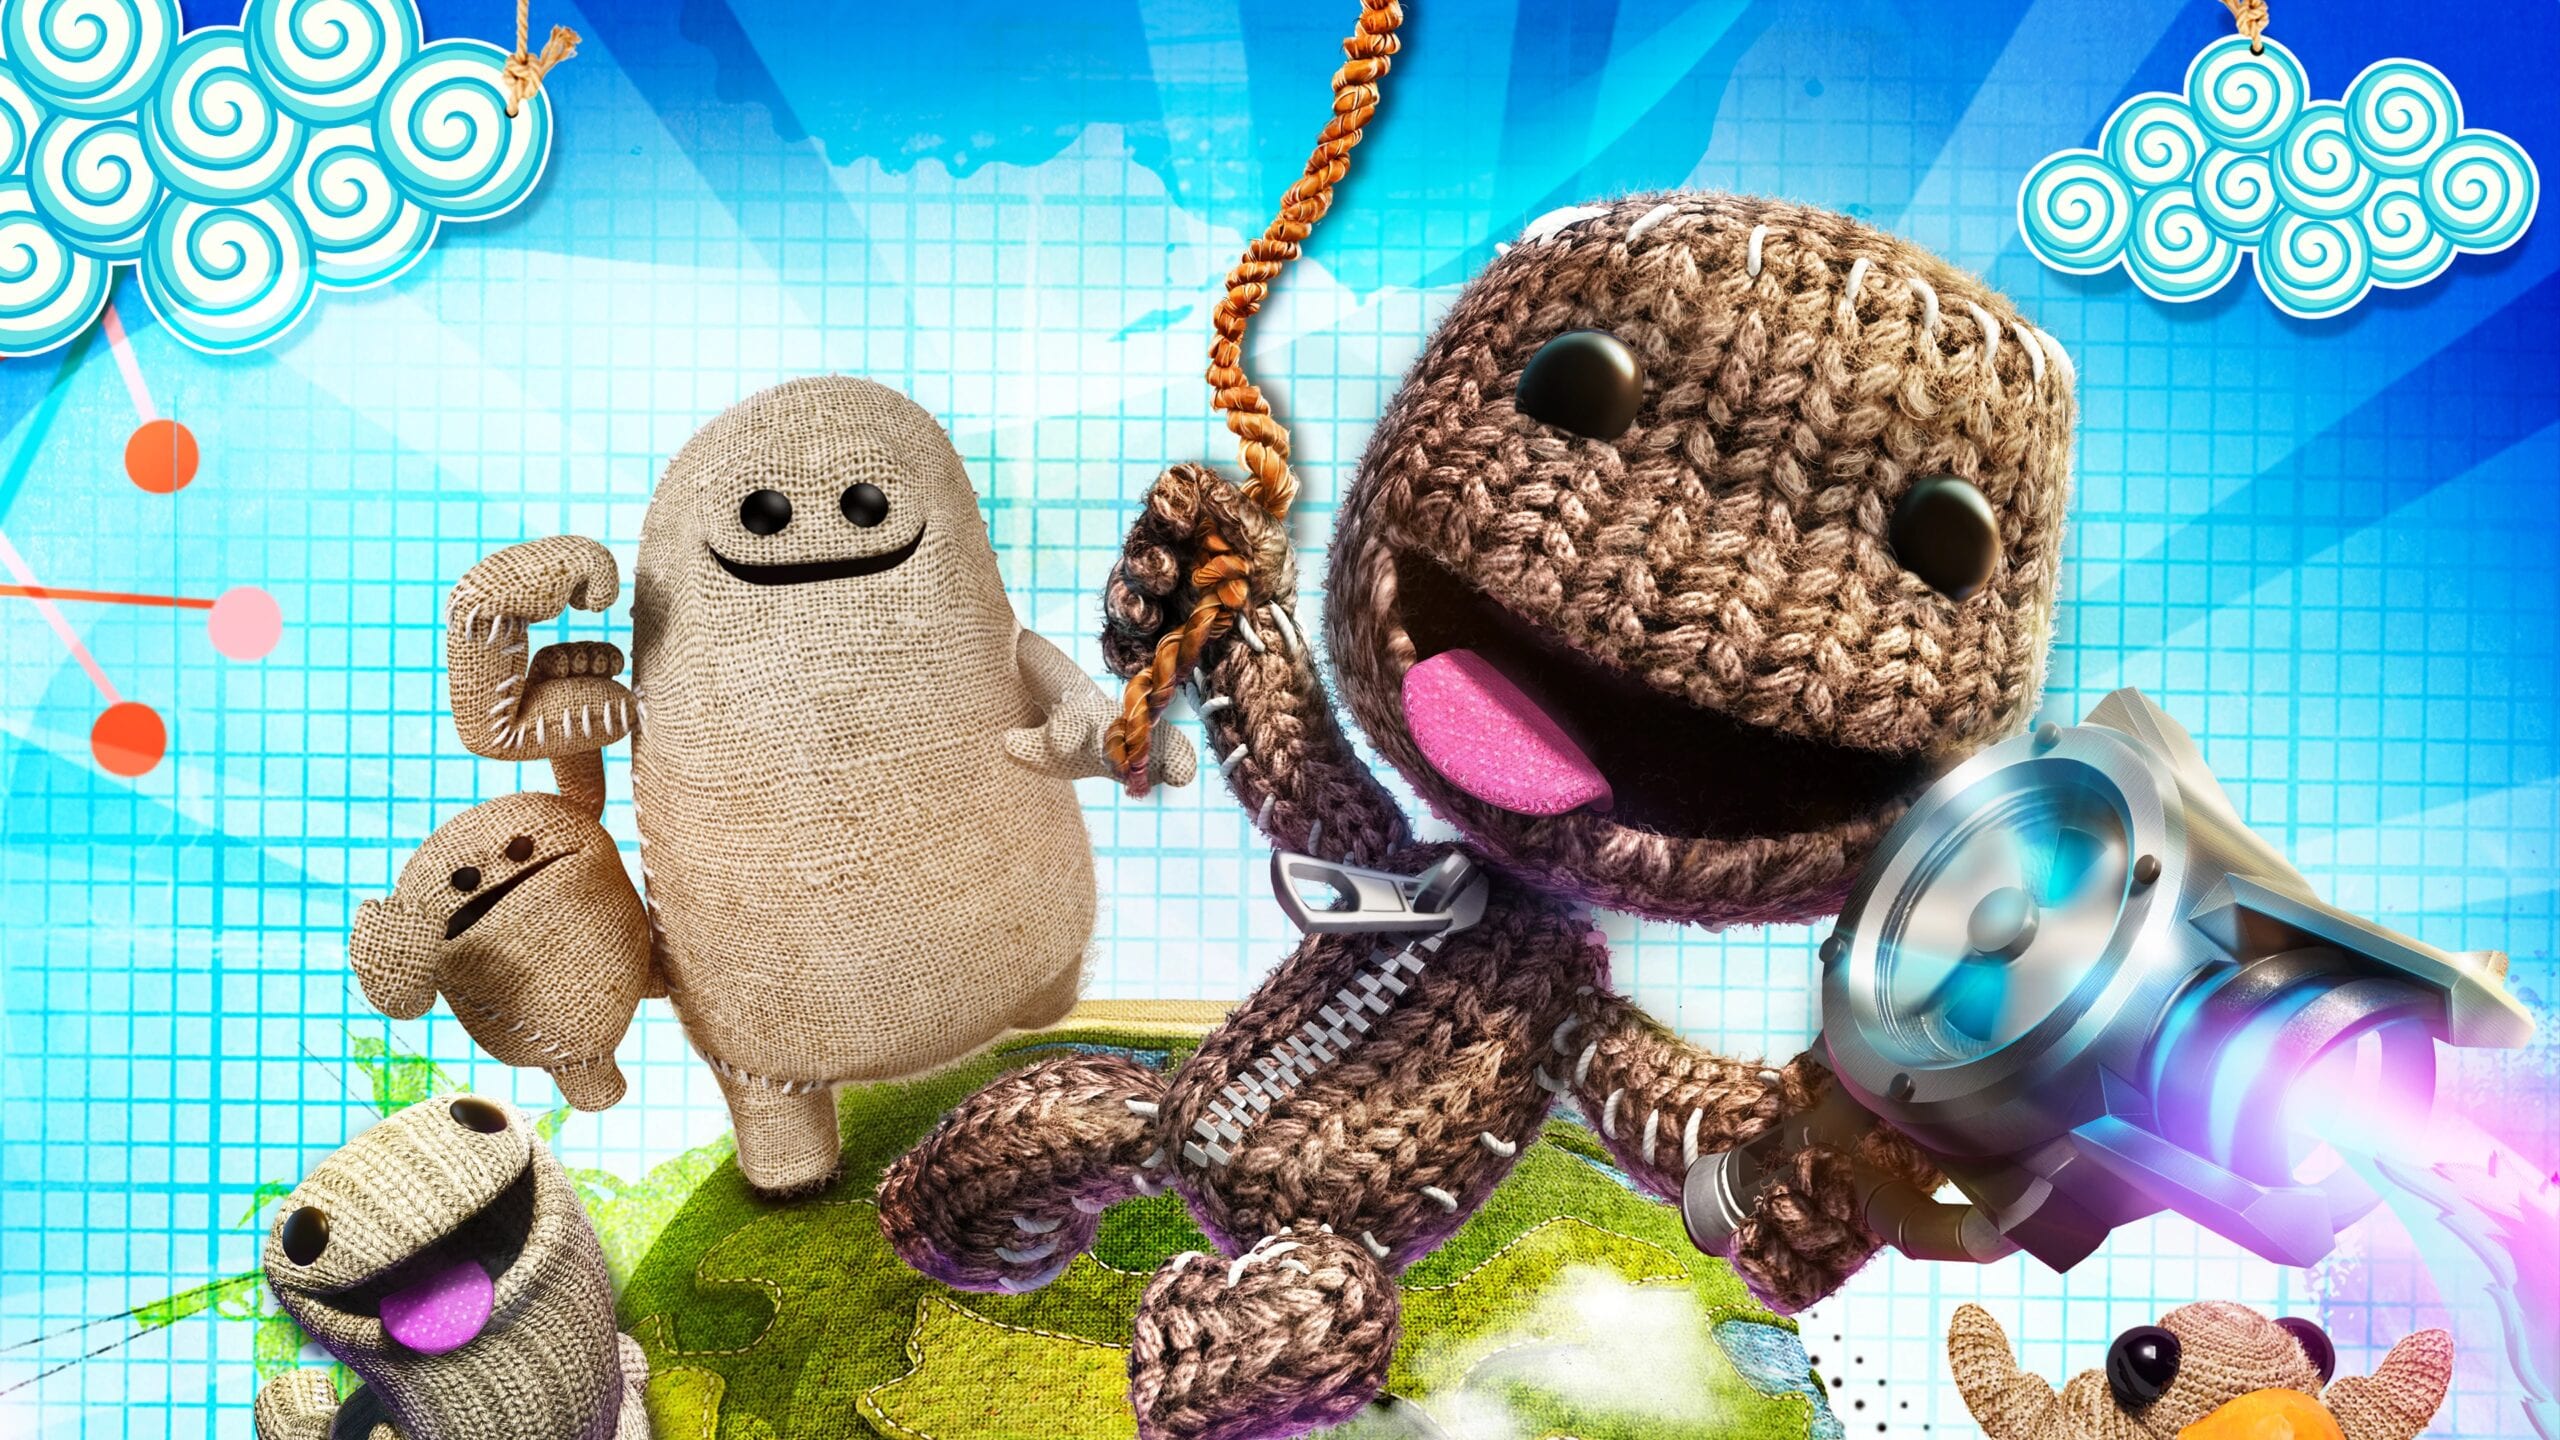 25 Little big planet and more ideas